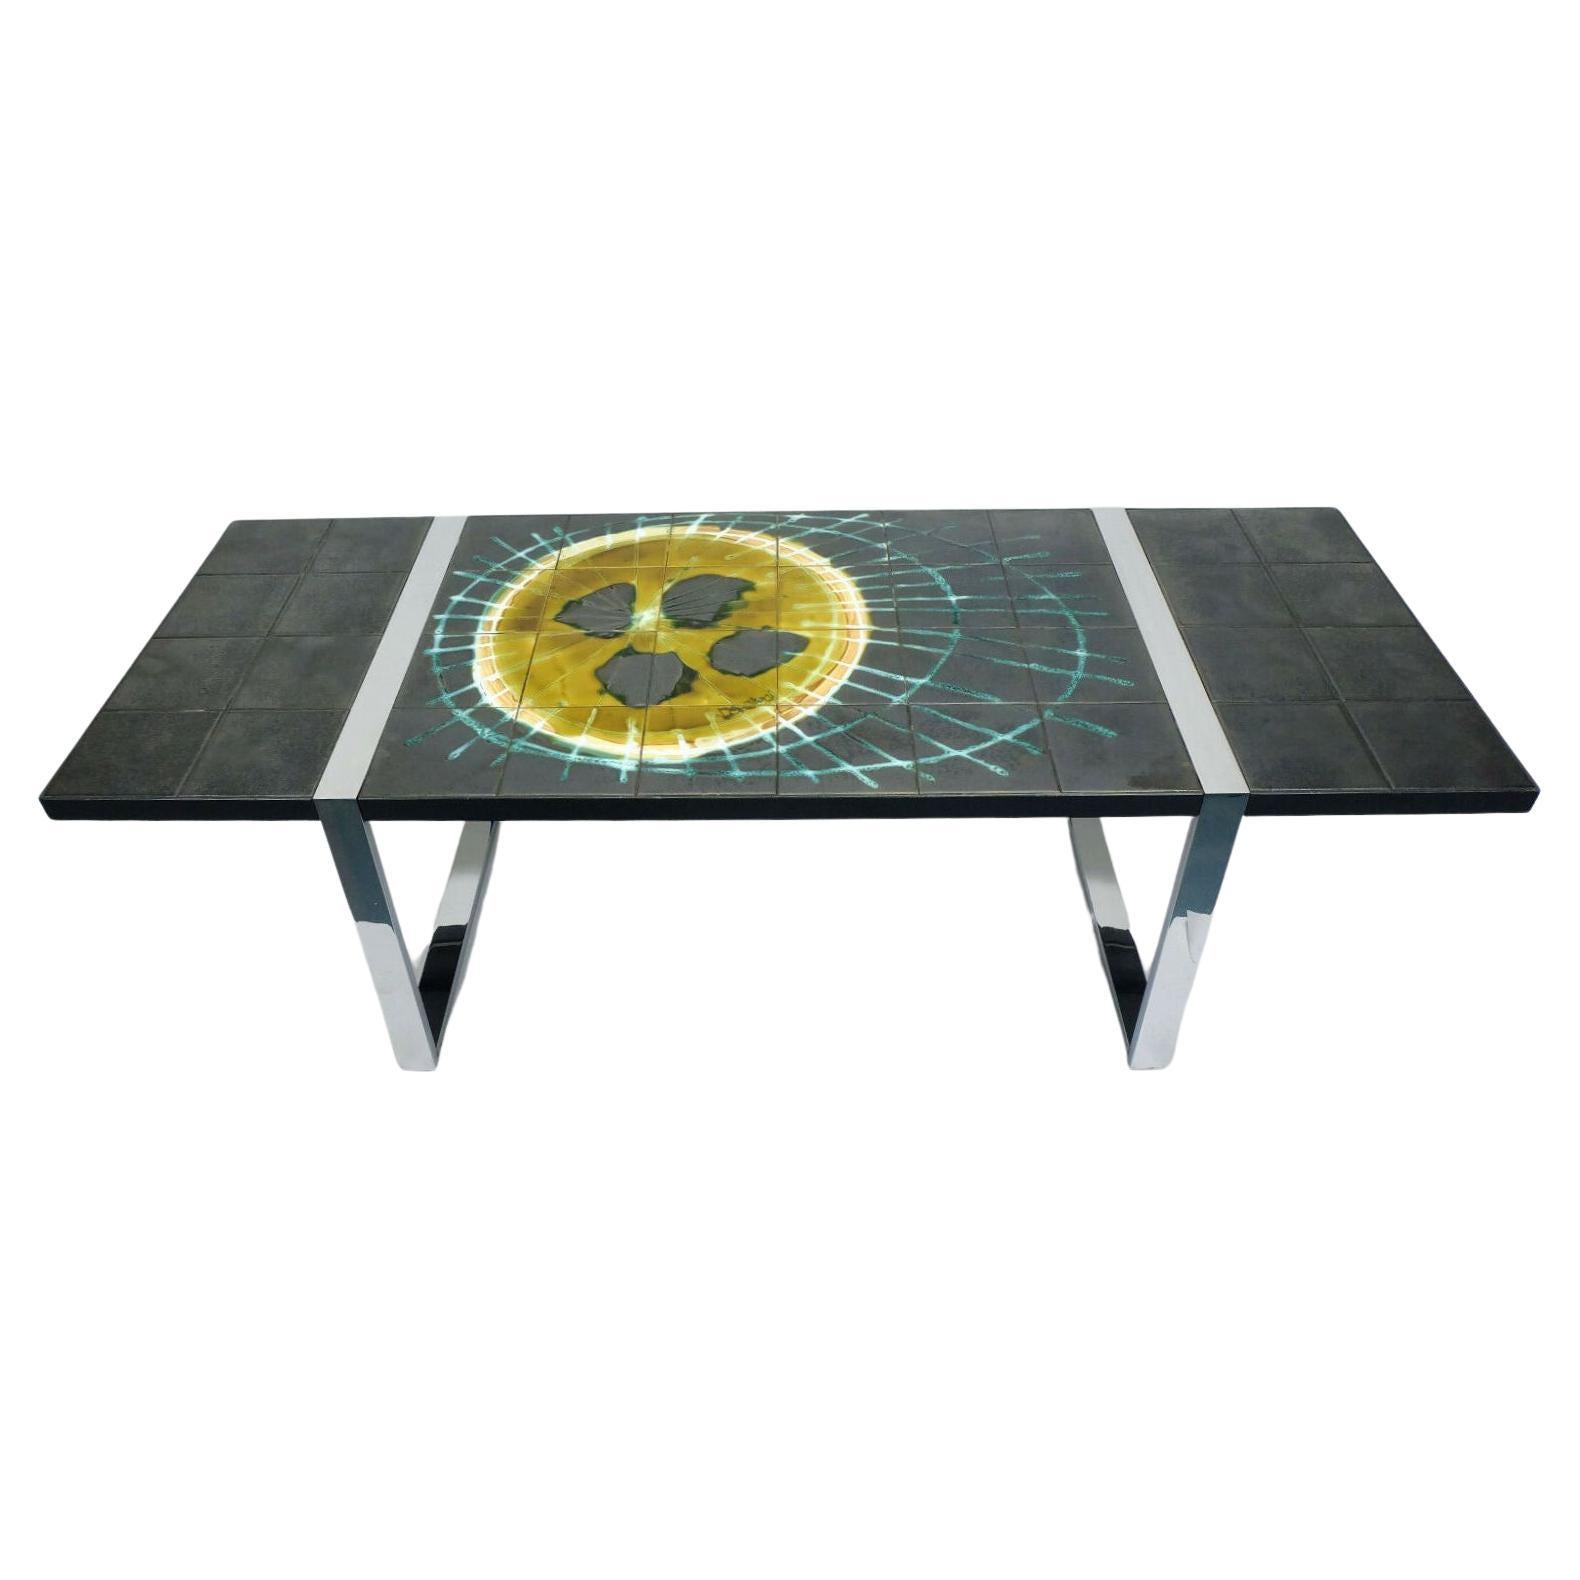 1960s Belarti Coffeetable with Ceramic Tile Top and Chrome Base For Sale